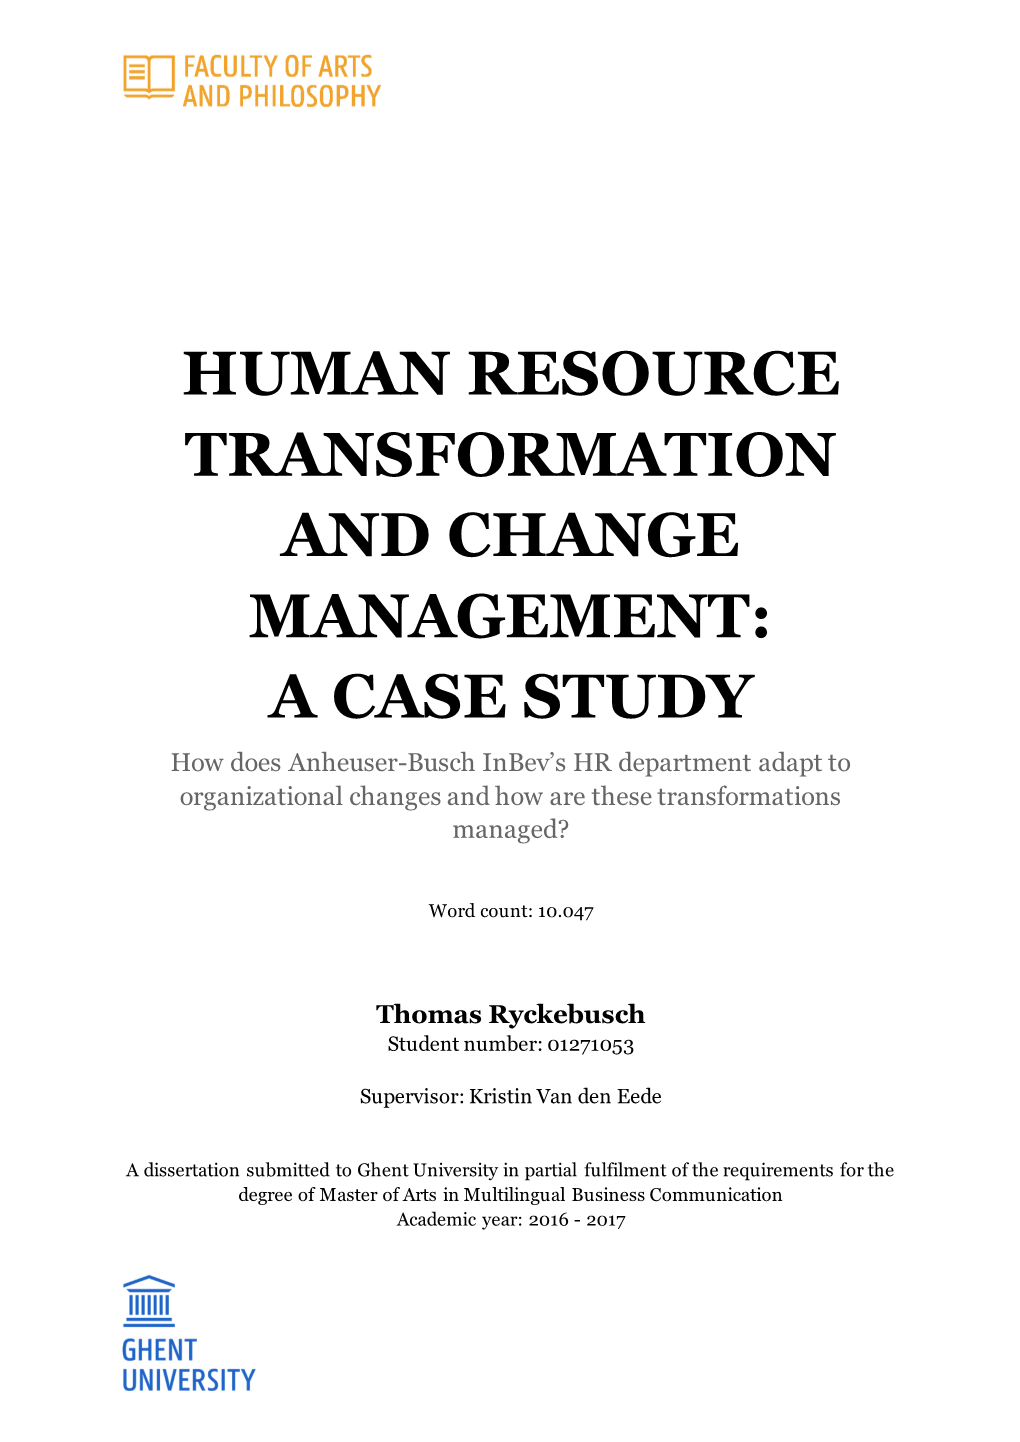 Human Resource Transformation and Change Management: a Case Study